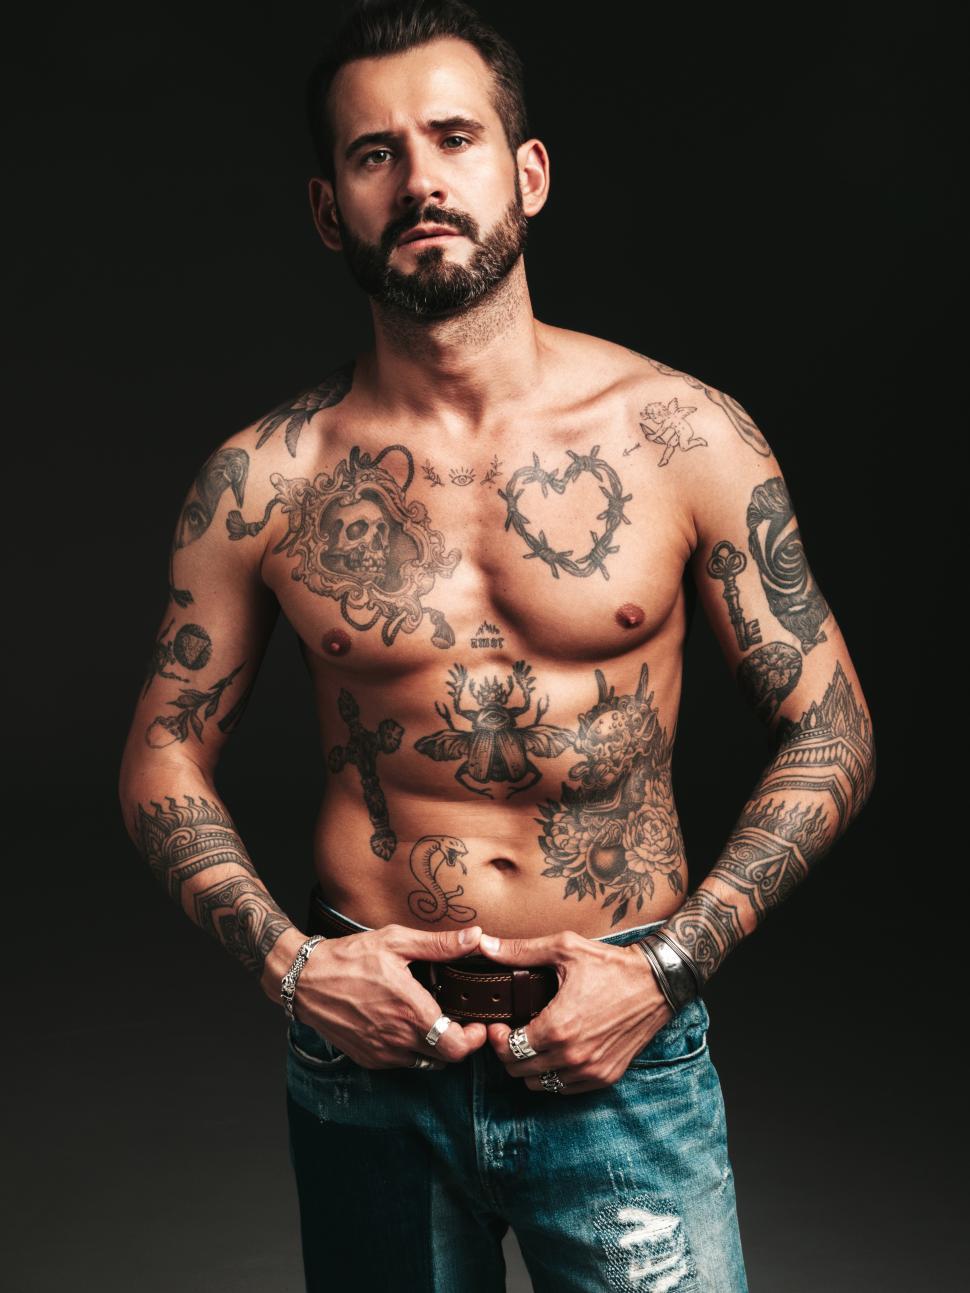 Free Image of A man with tattoos on his chest 